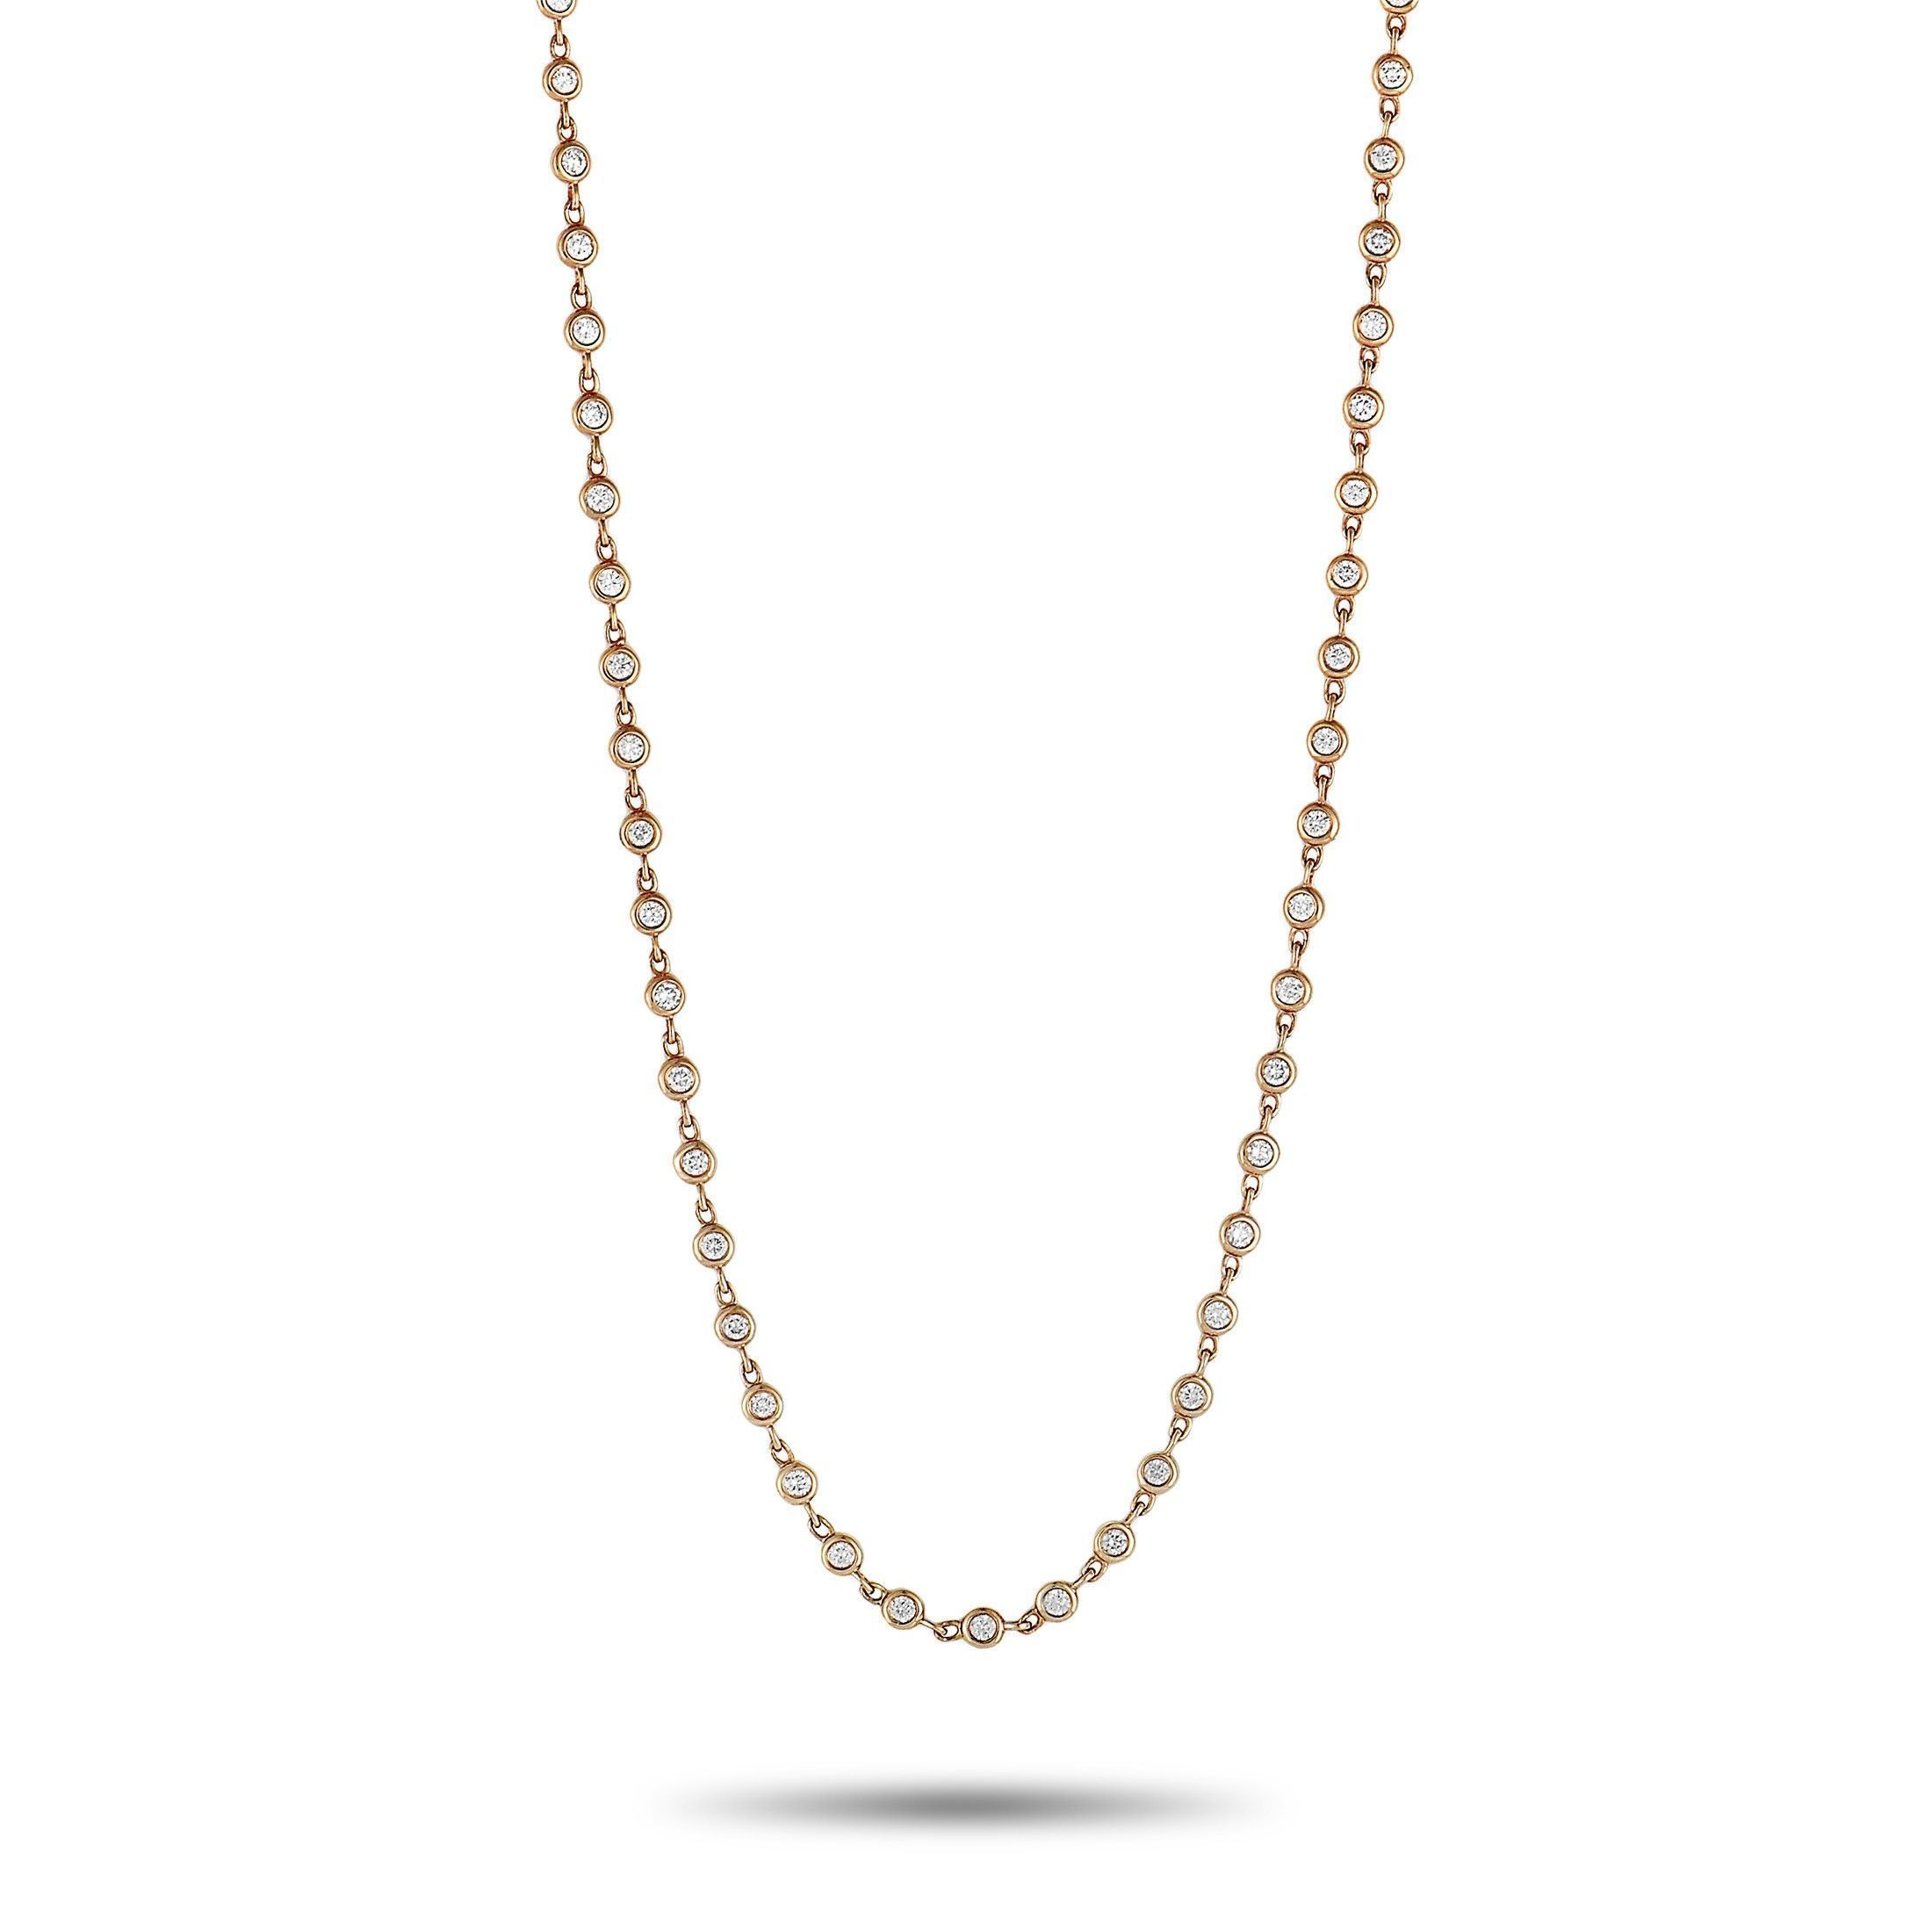 Lb Exclusive 18k Rose Gold And Round Diamonds Sautoir Necklace With Regard To Most Up To Date Rose Gold Diamond Sautoir Necklaces (View 7 of 25)